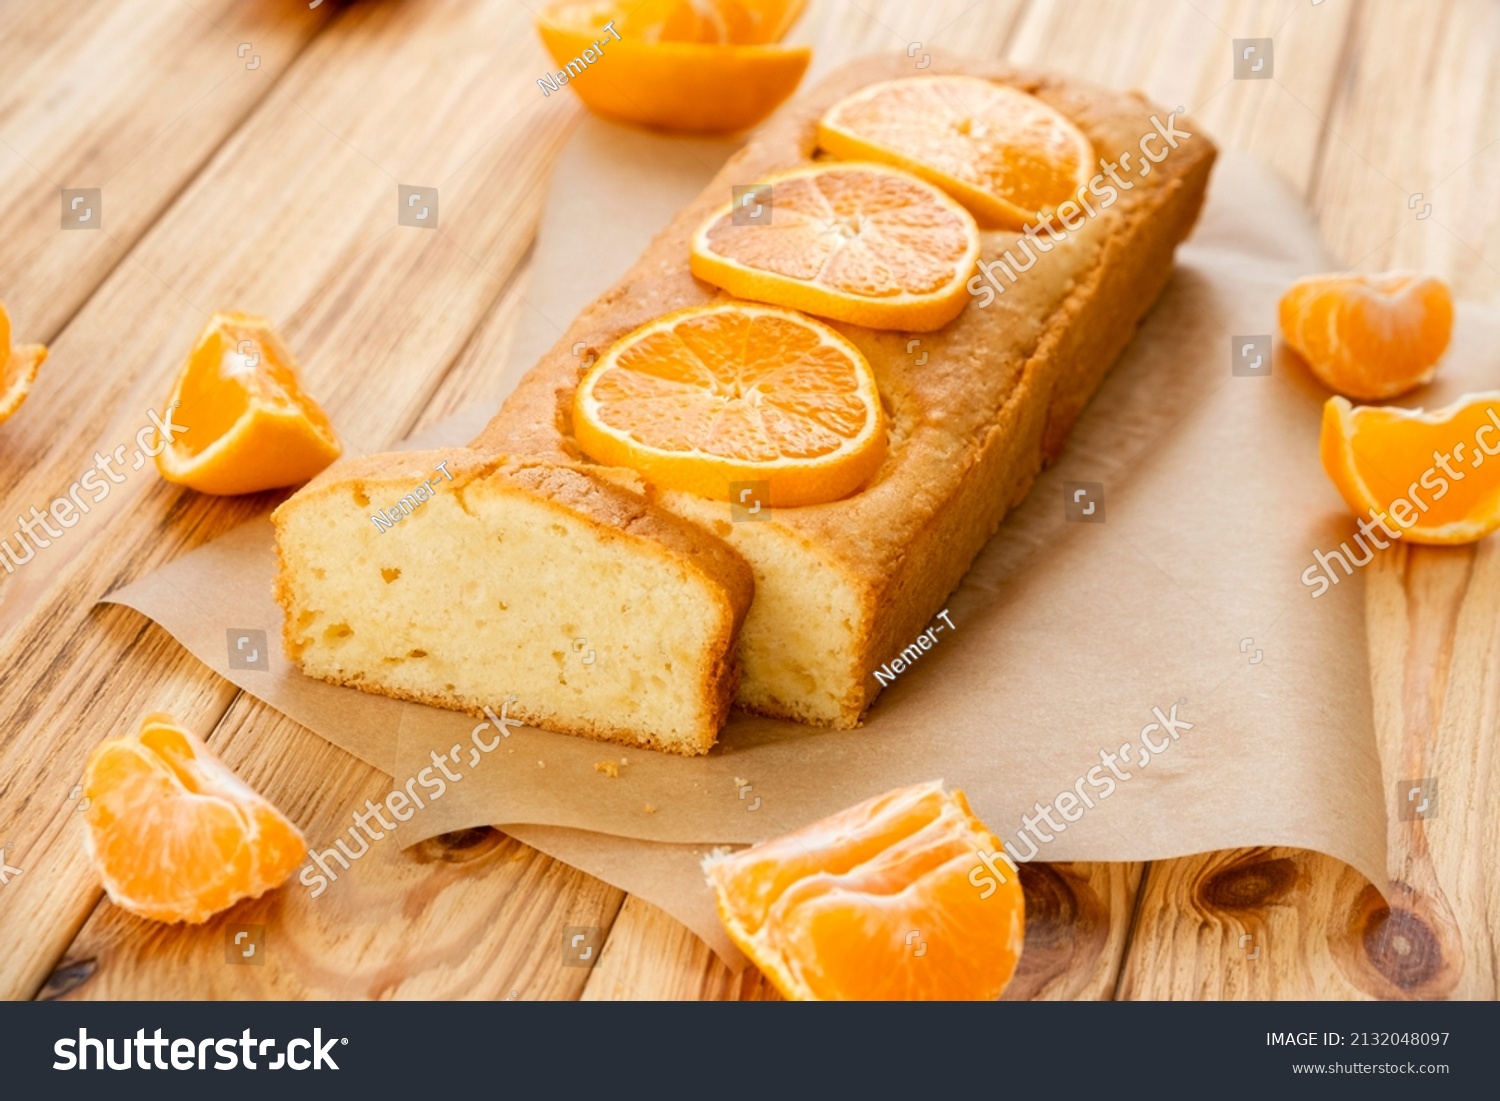 Moist orange fruit pound cake on parchment on rustic wooden background with slices of orange. Delicious breakfast, traditional English tea time. Reciepe of orange pie loaf. #2132048097